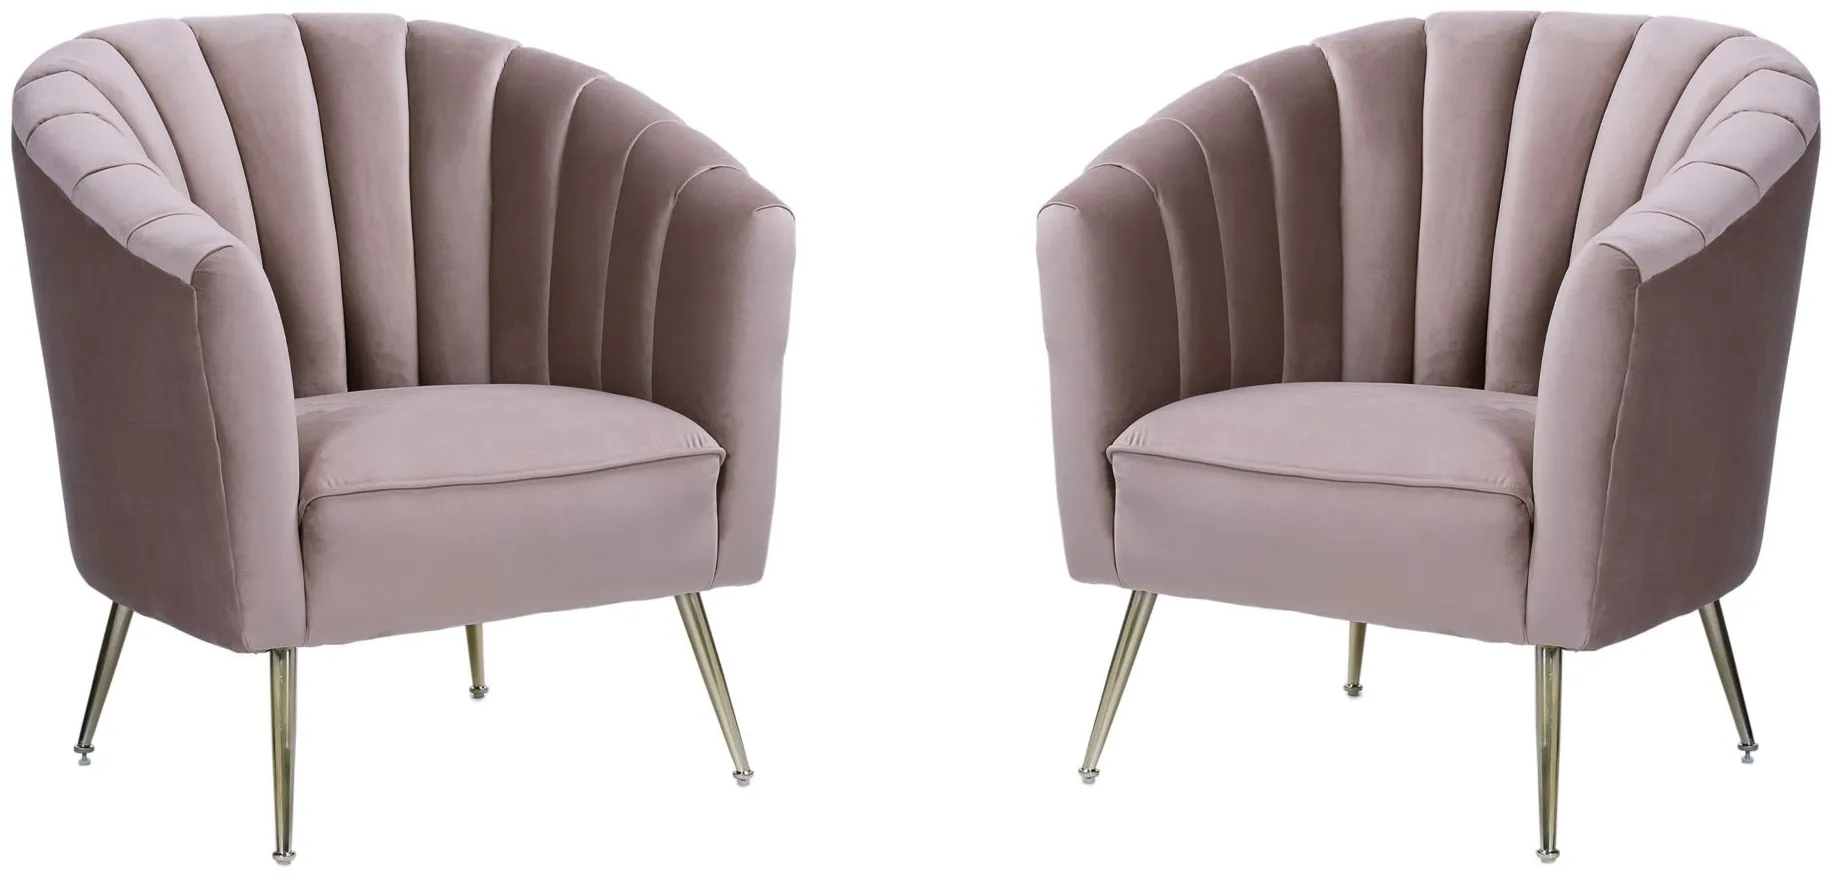 Rosemont Accent Chair (Set of 2) in Blush and Gold by Manhattan Comfort